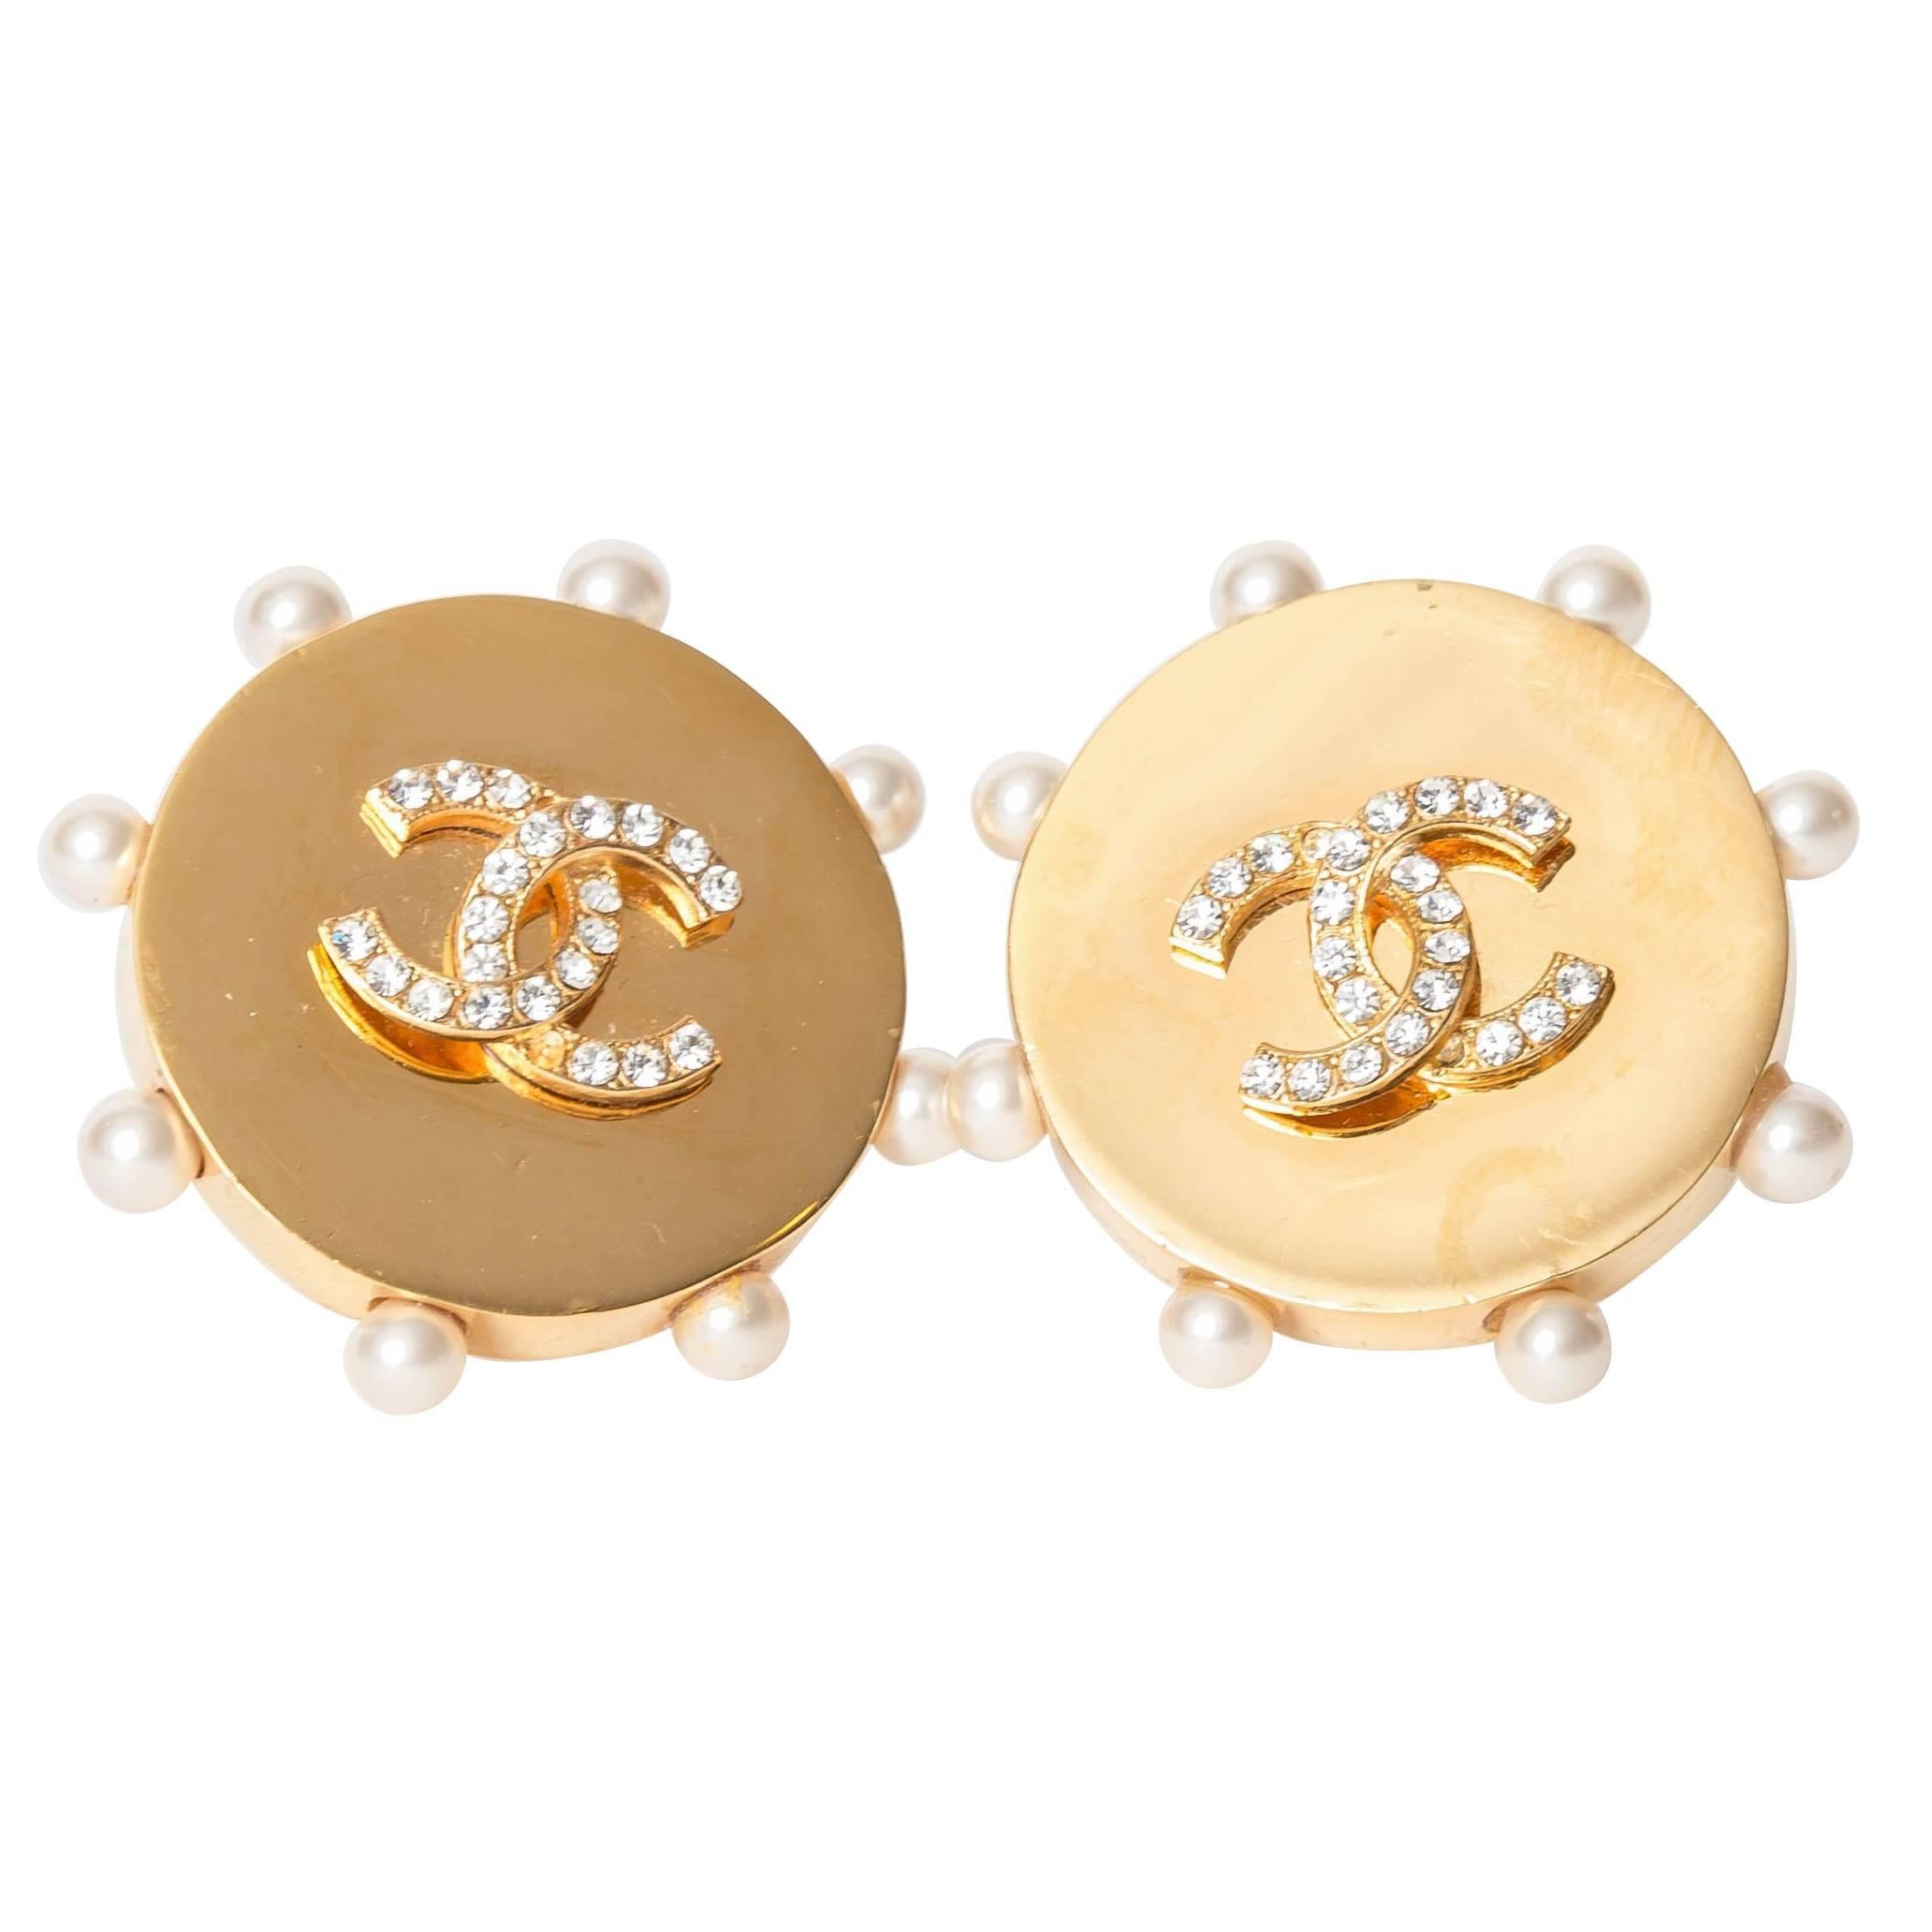 Chanel Vintage Gold Earrings with Pearl Surround